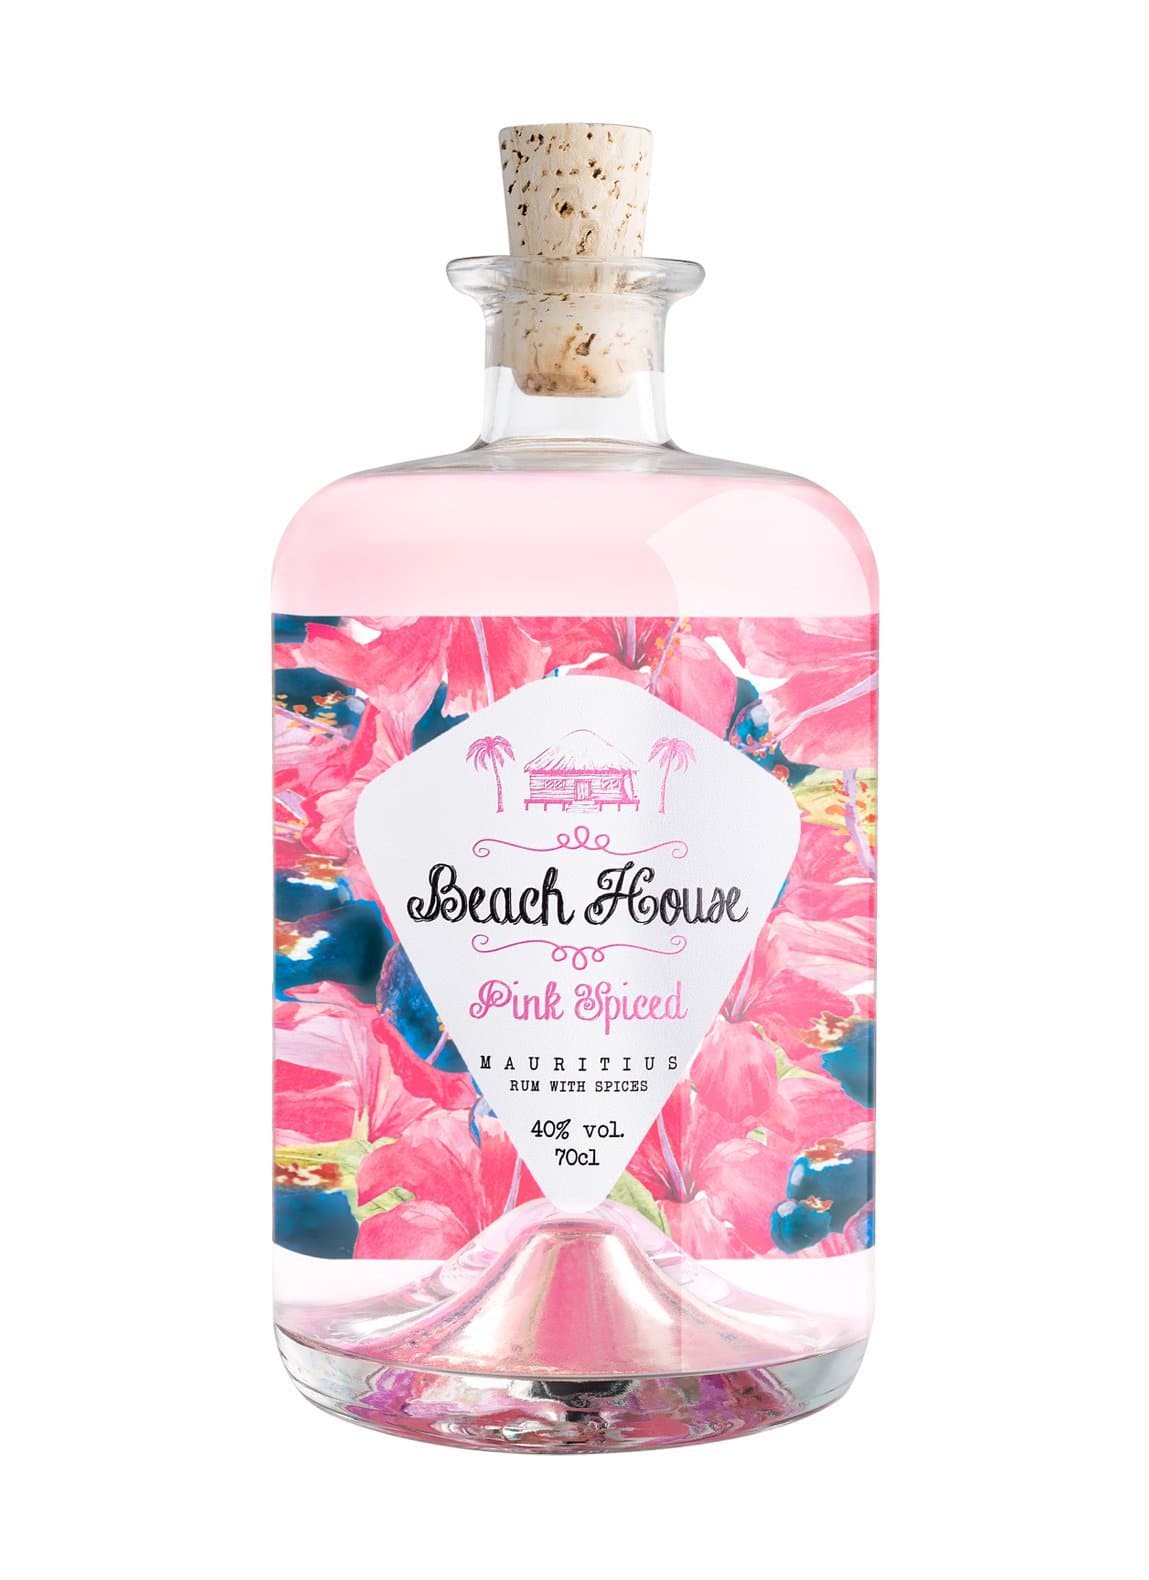 Beach House Pink Spiced Rum 40% 700ml | Rum | Shop online at Spirits of France